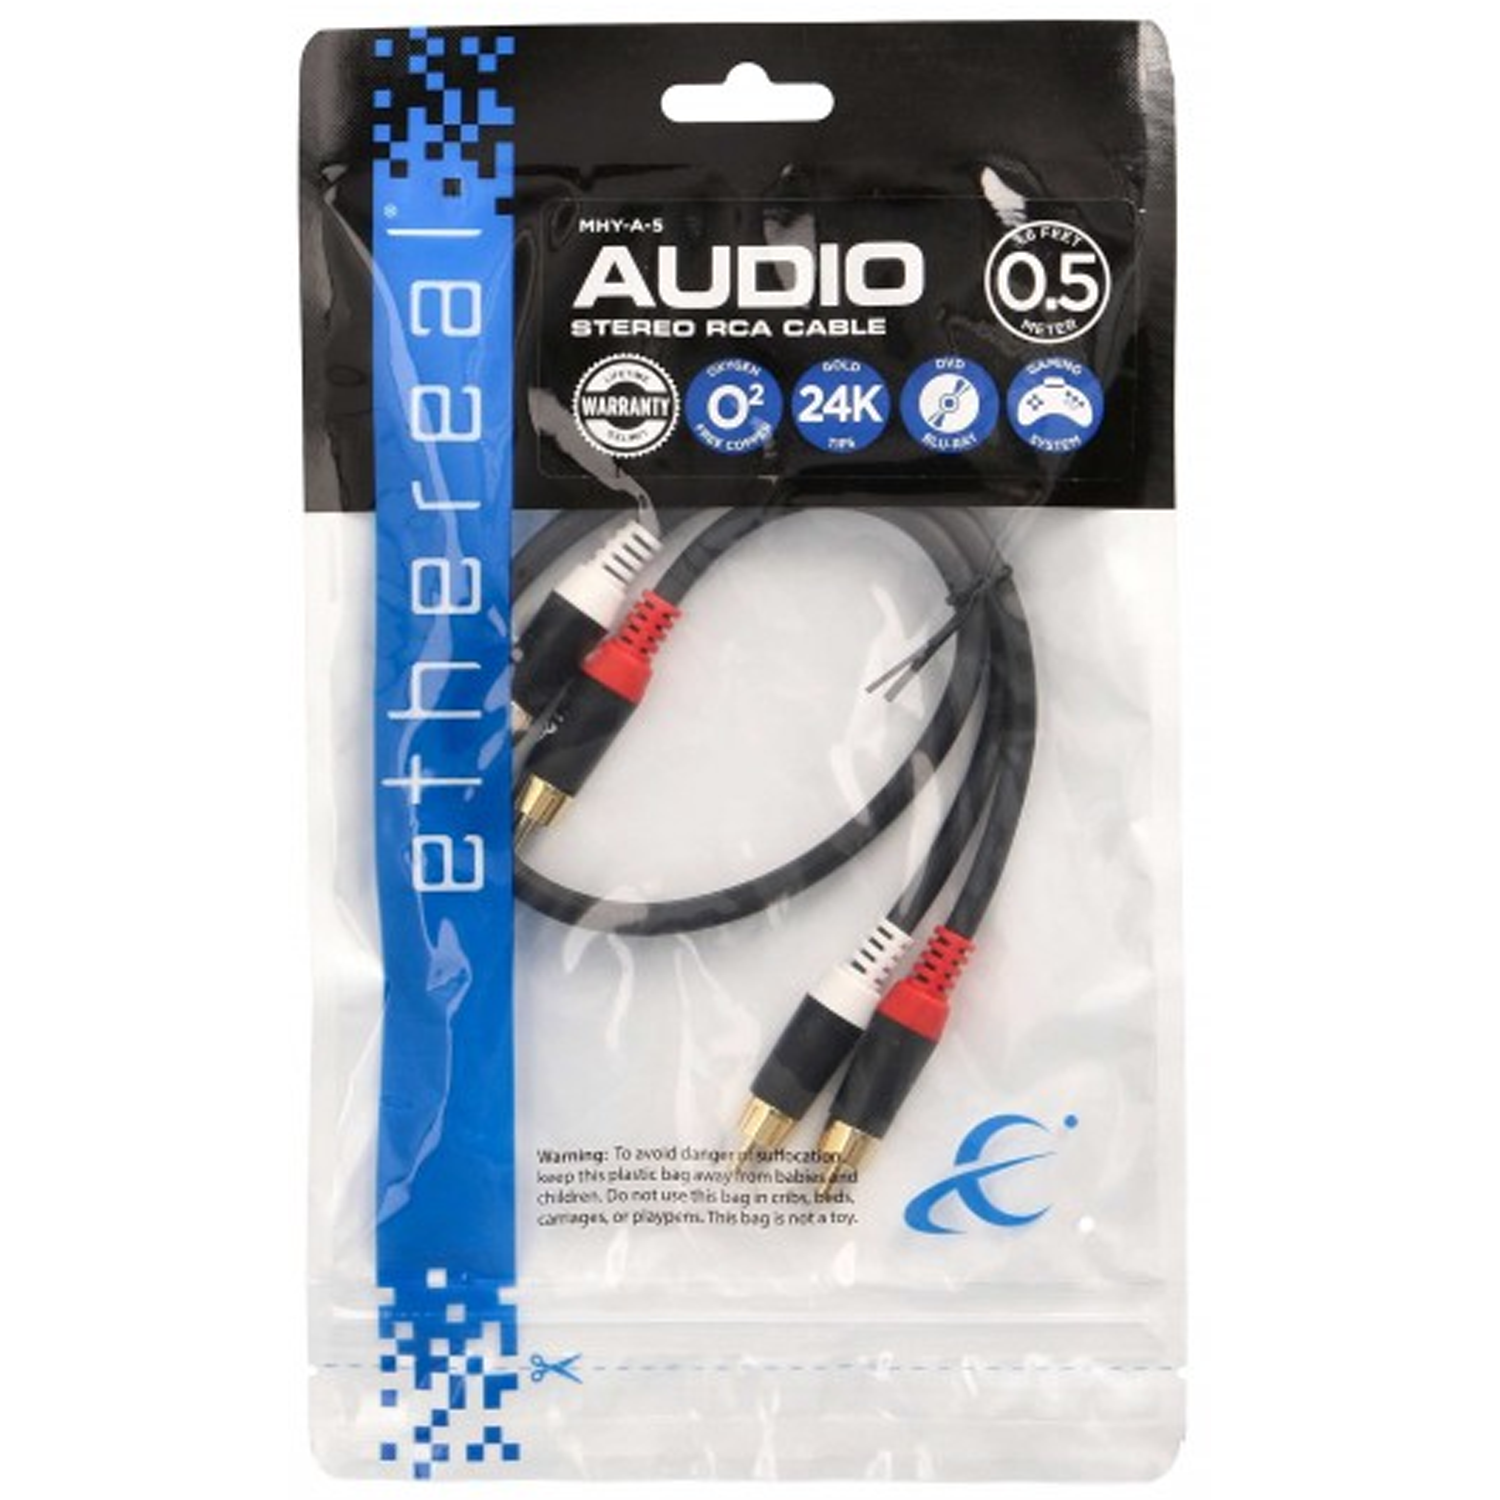 ETHEREAL MHY-A 1.5ft RCA Stereo Cable